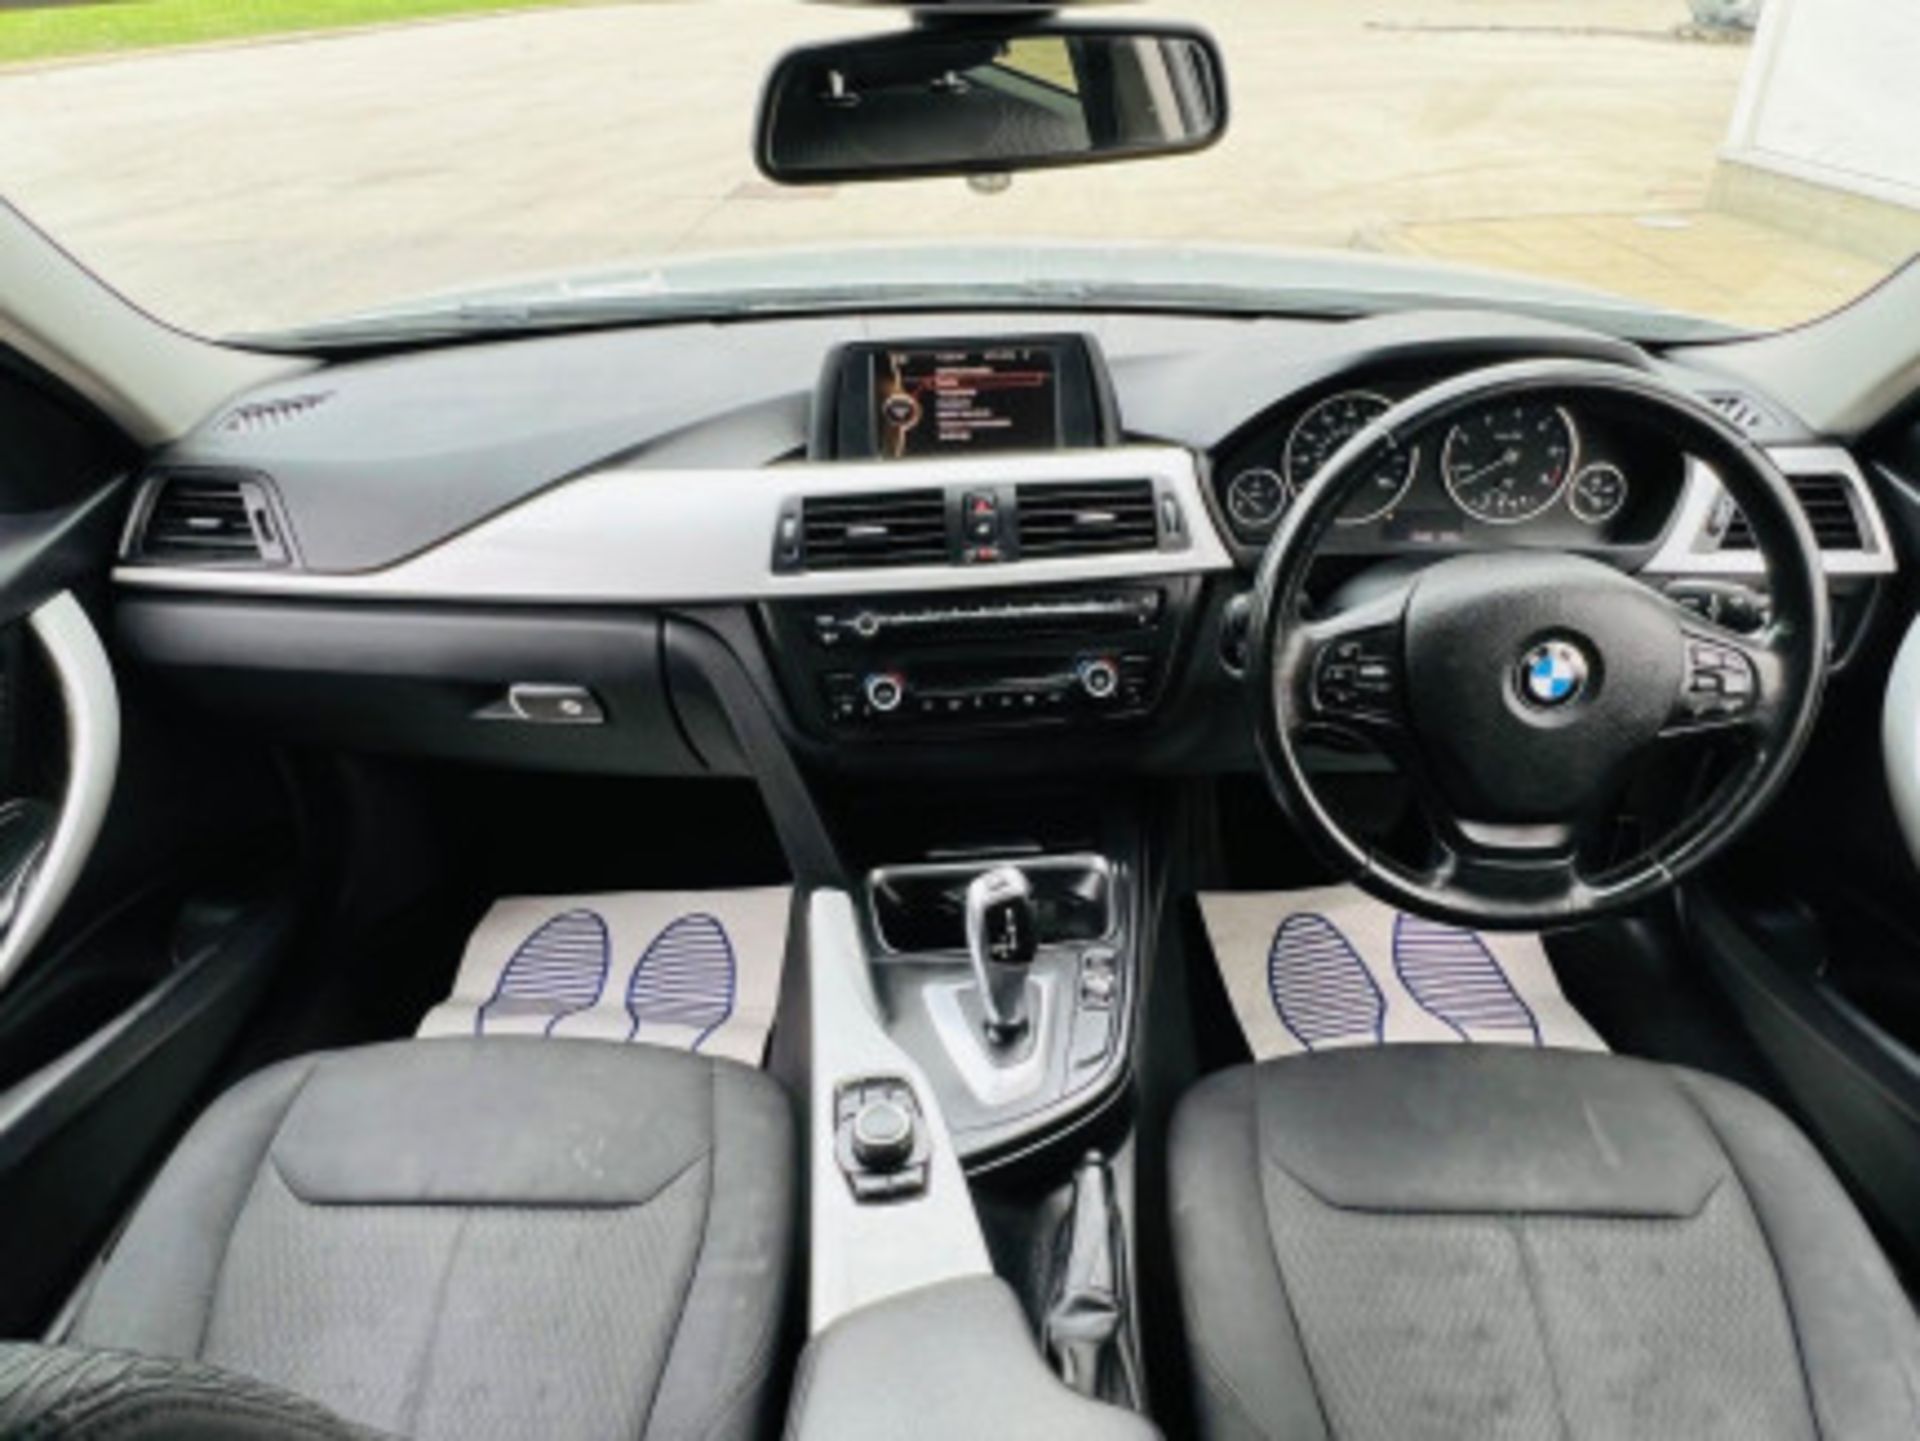 BMW 3 SERIES 2.0 DIESEL ED START STOP - A WELL-MAINTAINED GEM >>--NO VAT ON HAMMER--<< - Image 51 of 229